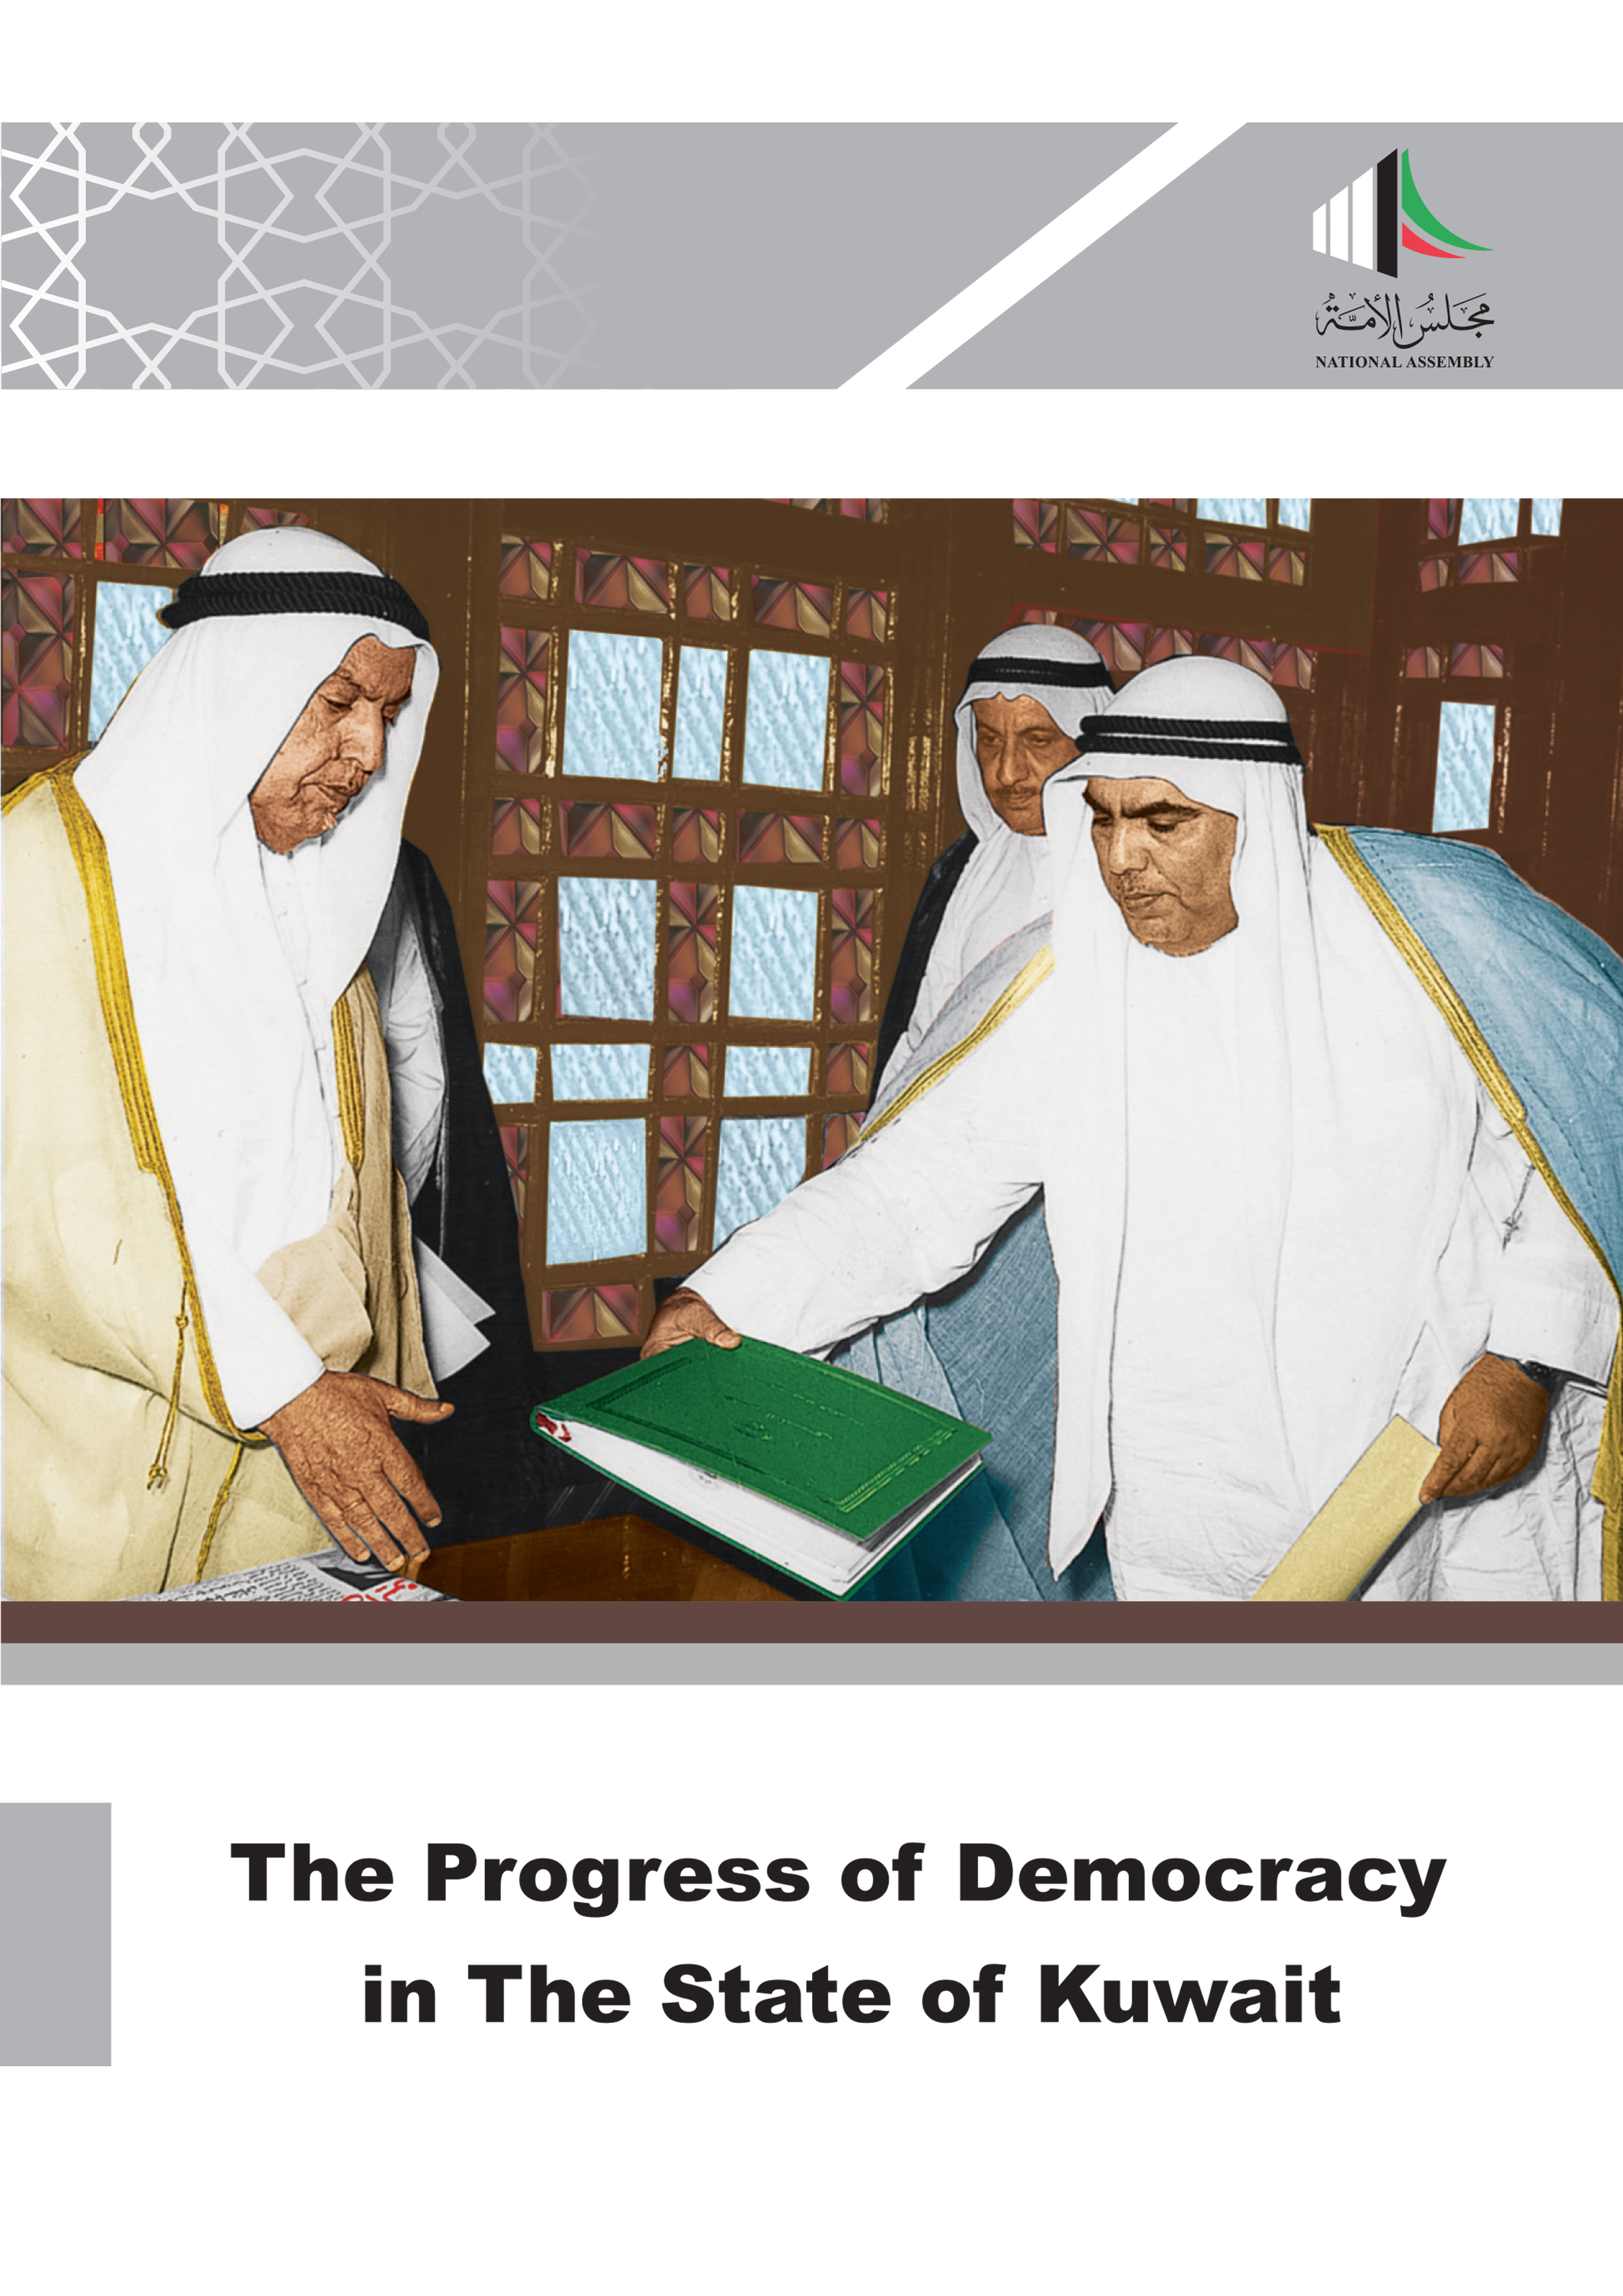 The Progress of Democracy in The State of Kuwait